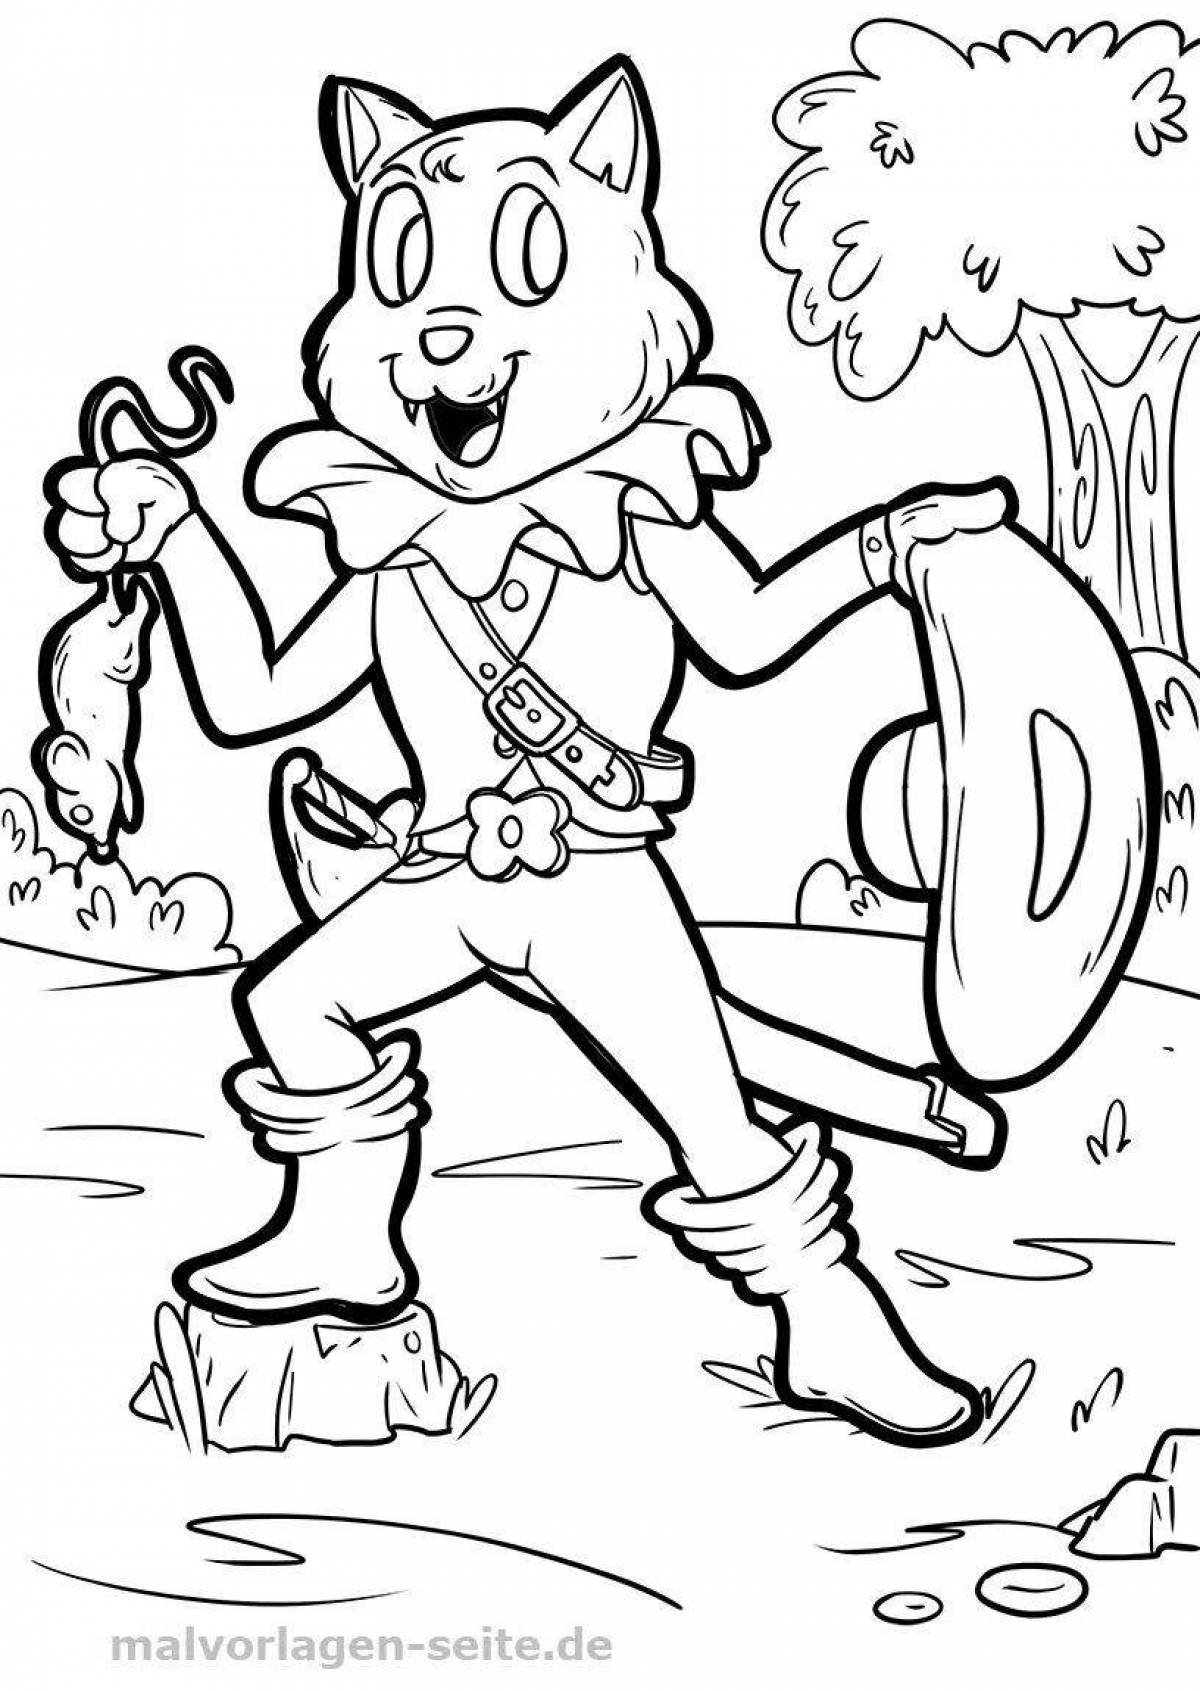 Charles Perrault's funny pussy in boots coloring book